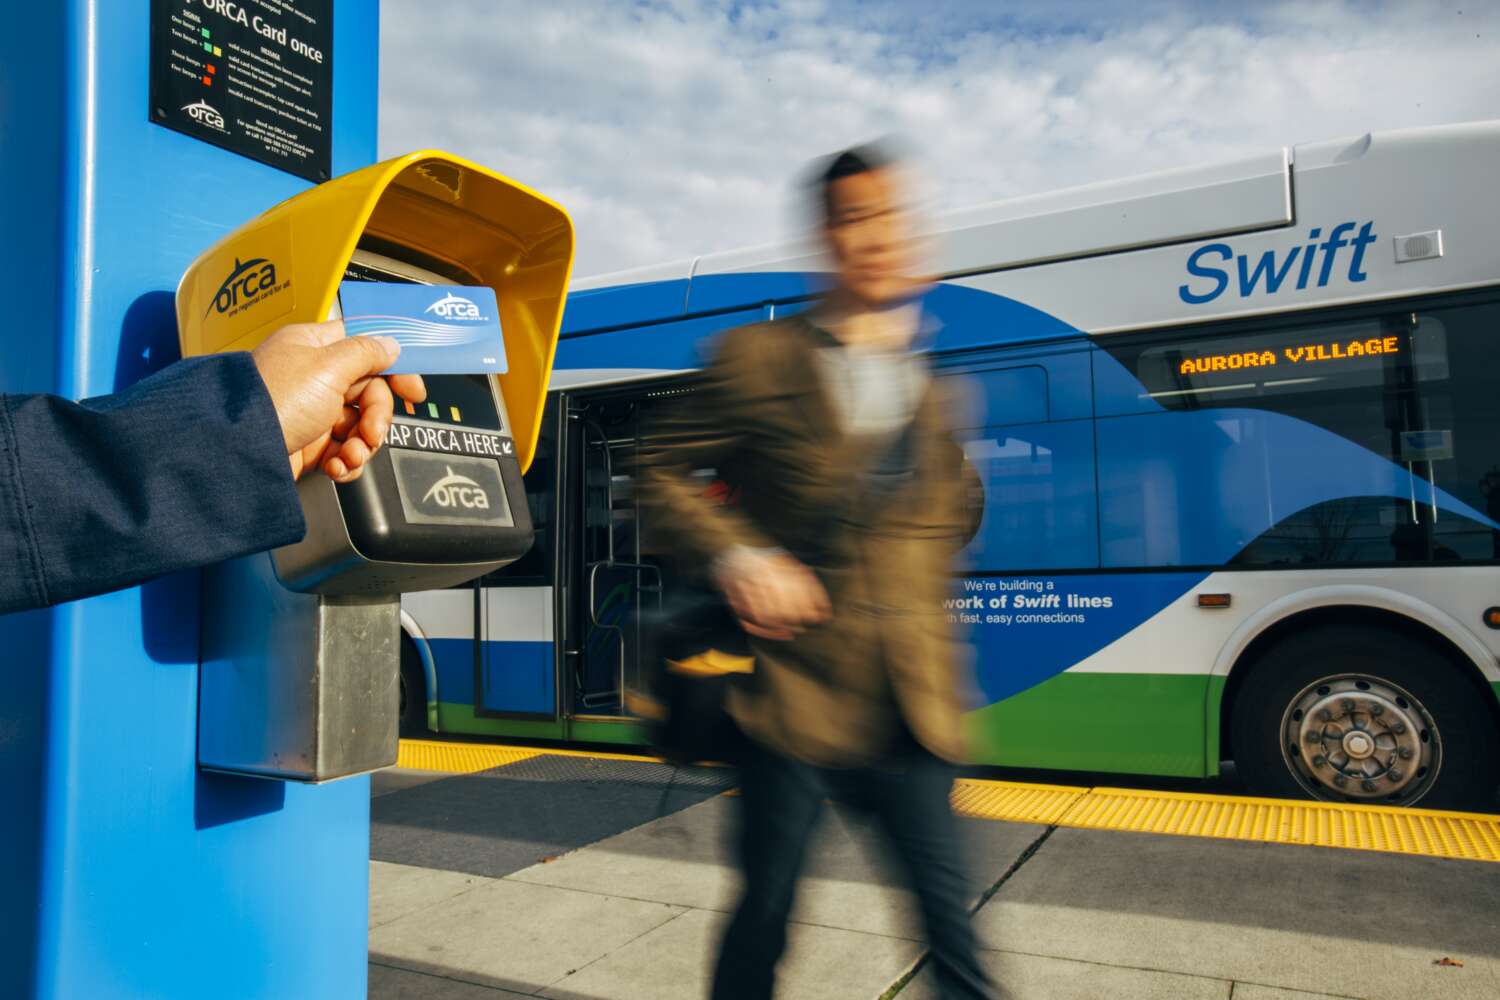 Rider taps ORCA card at a Swift station